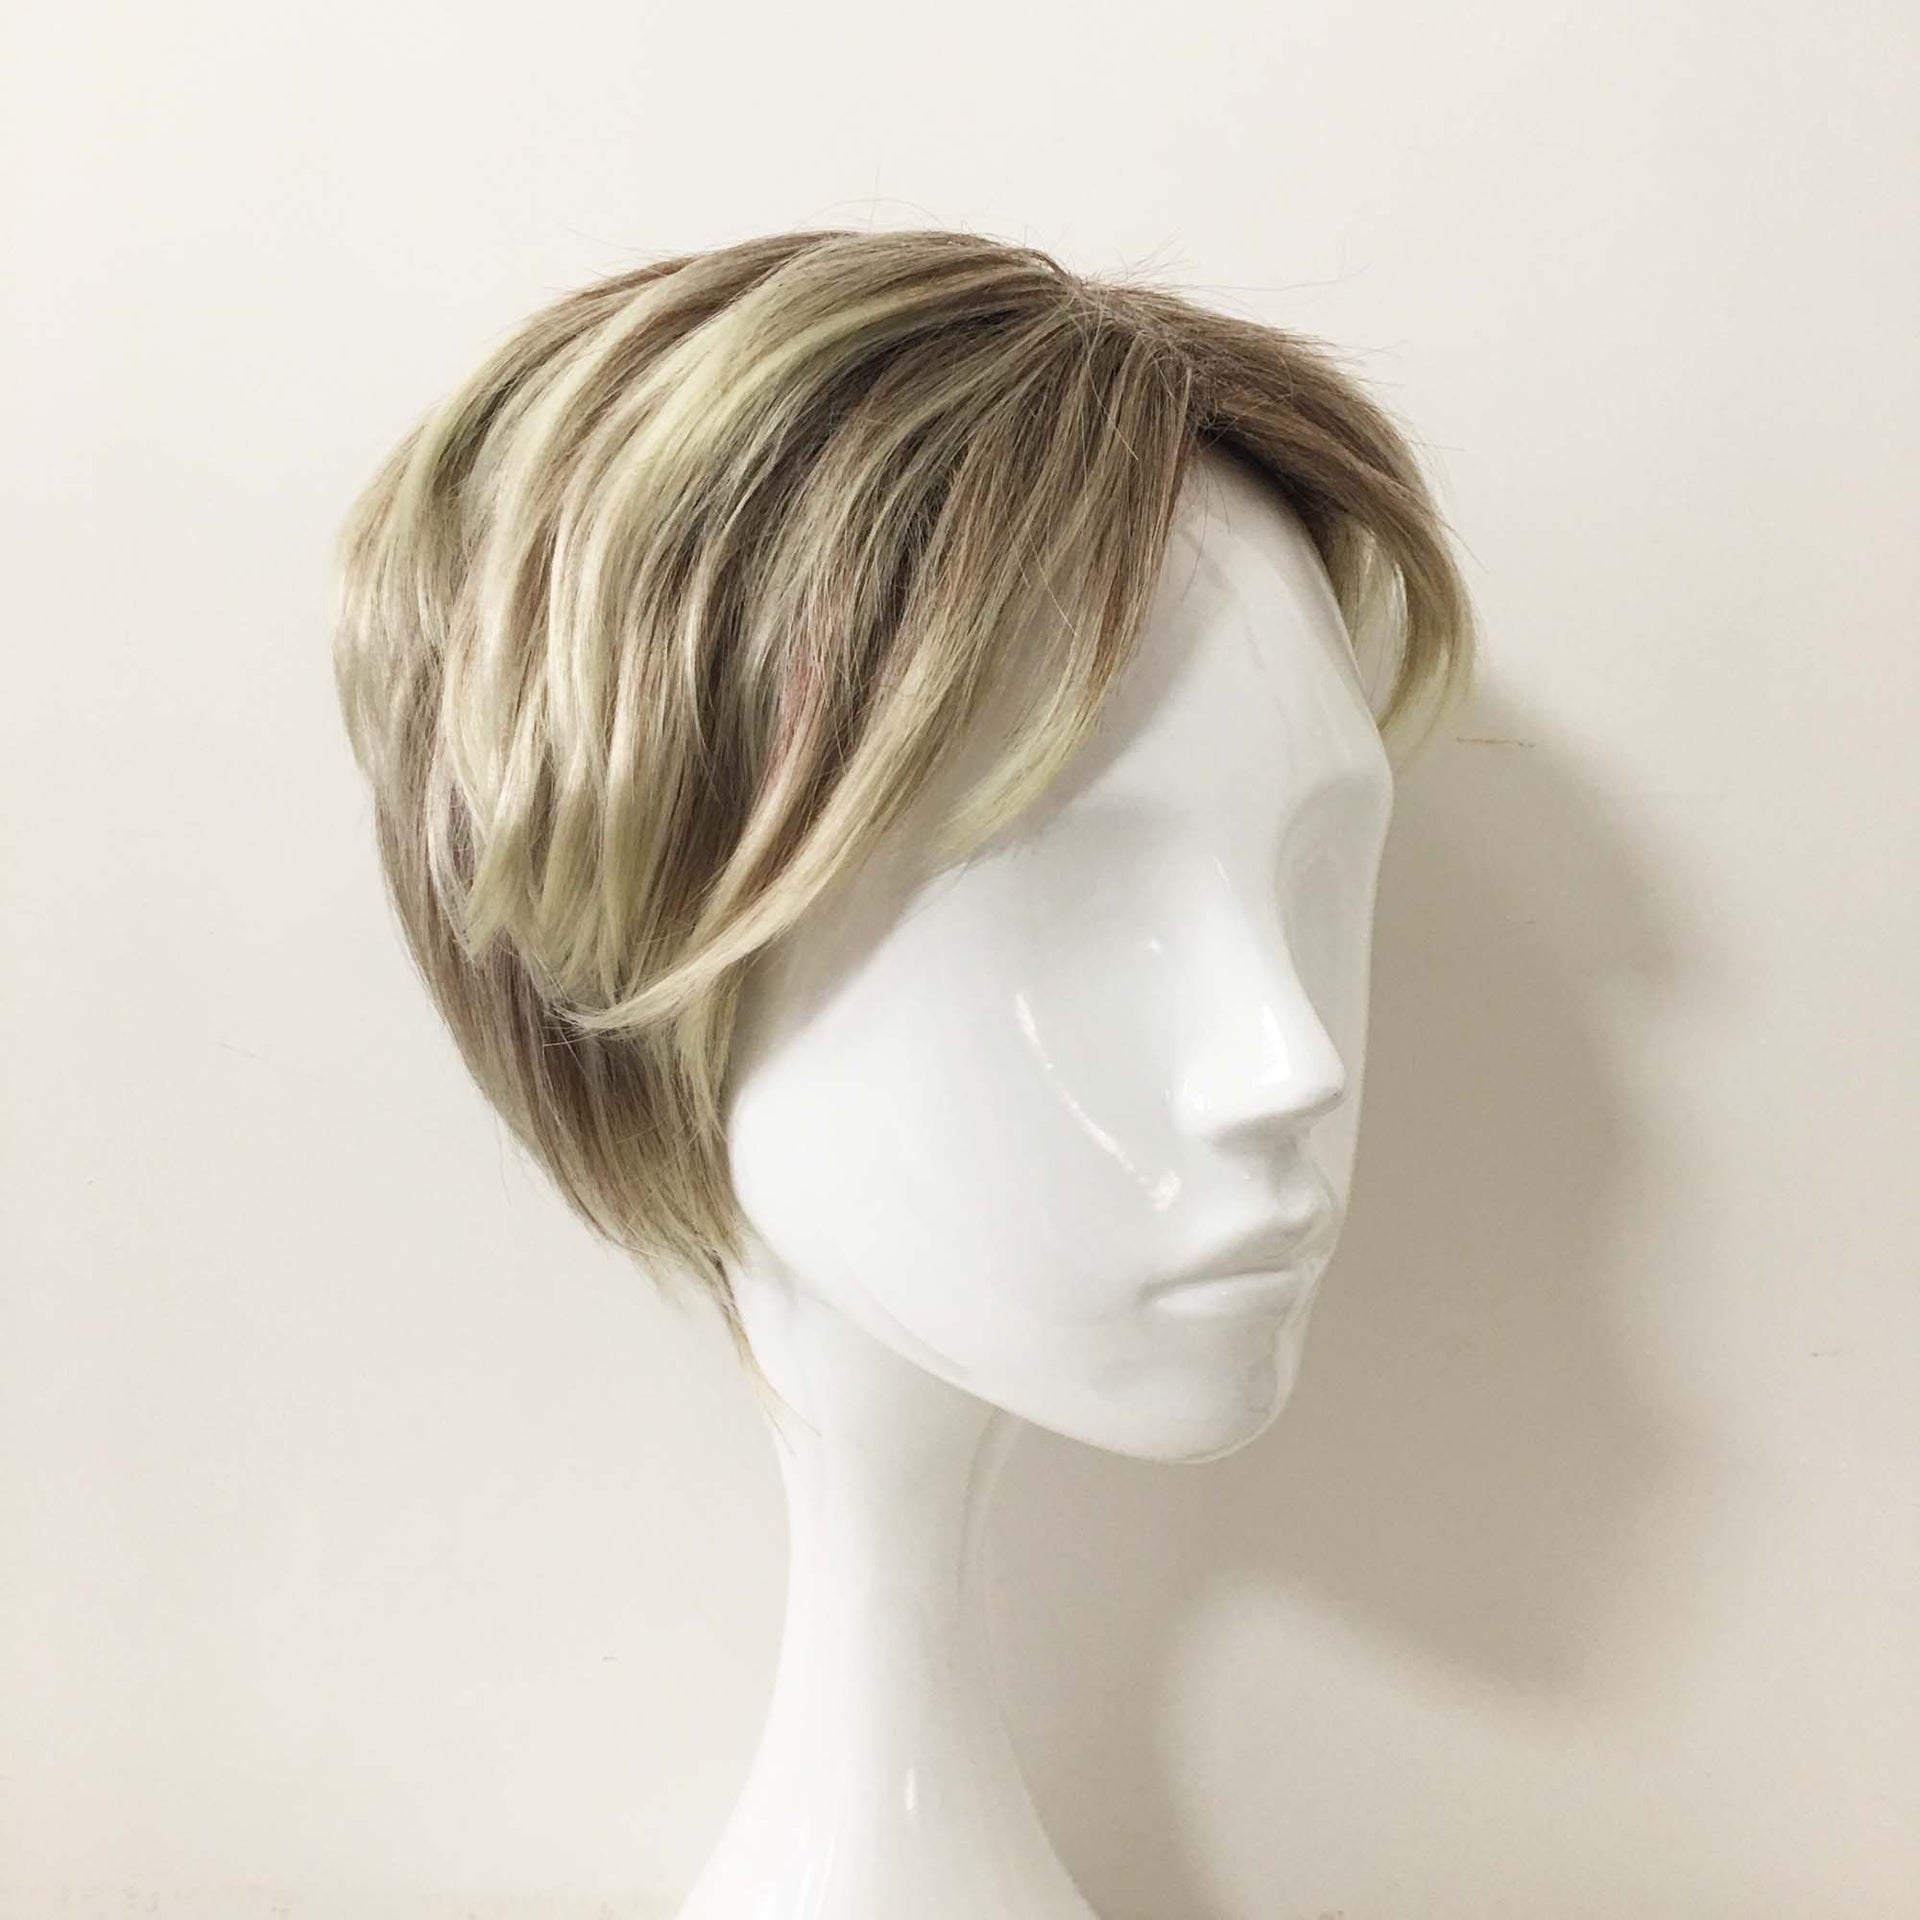 nevermindyrhead Men Ash Blonde Short Straight Pixie Middle Part Cosplay Wig